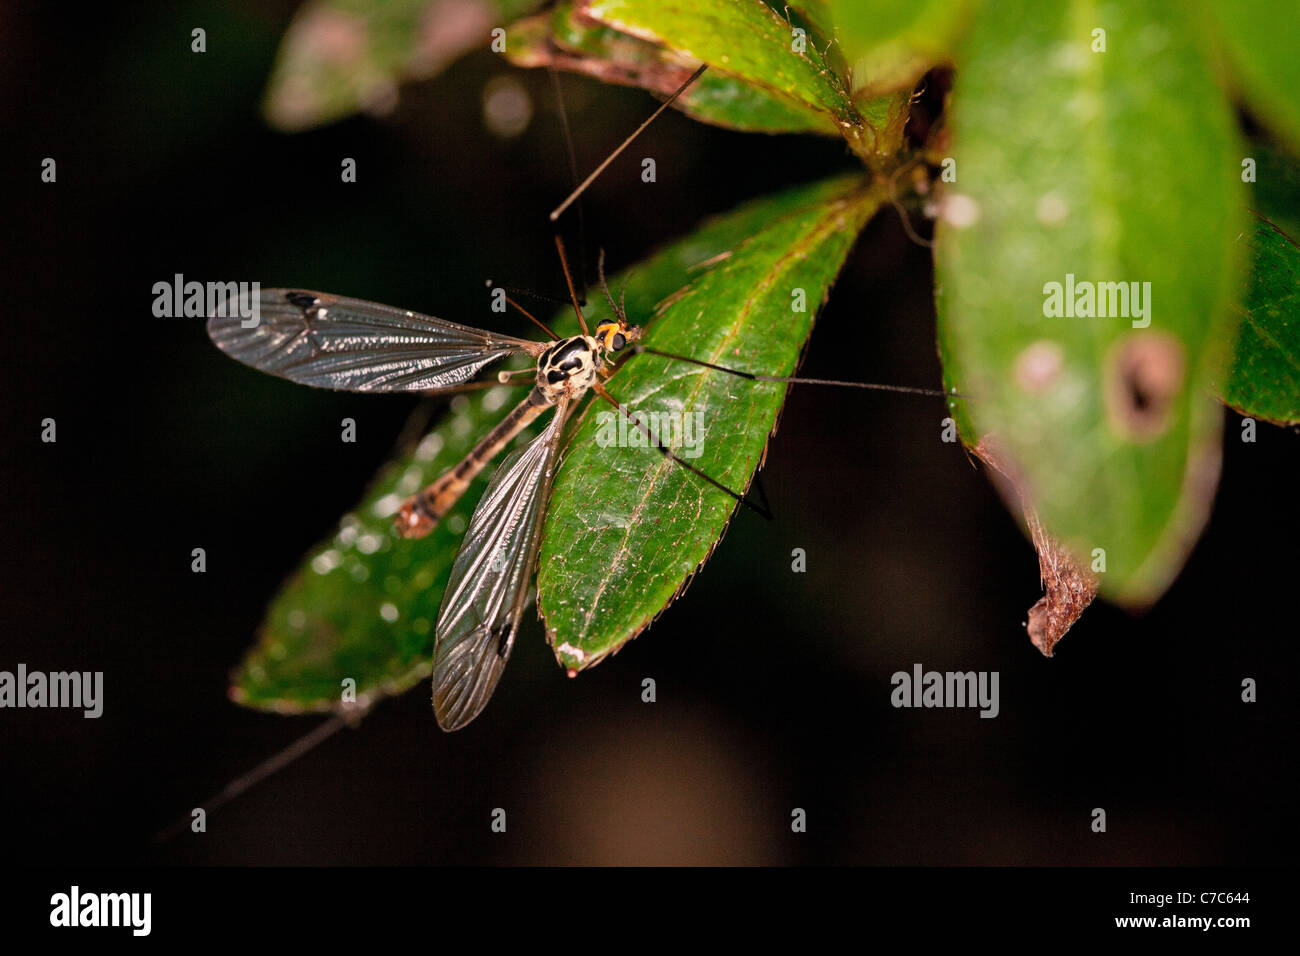 Spotted cranefly on a leaf. Stock Photo